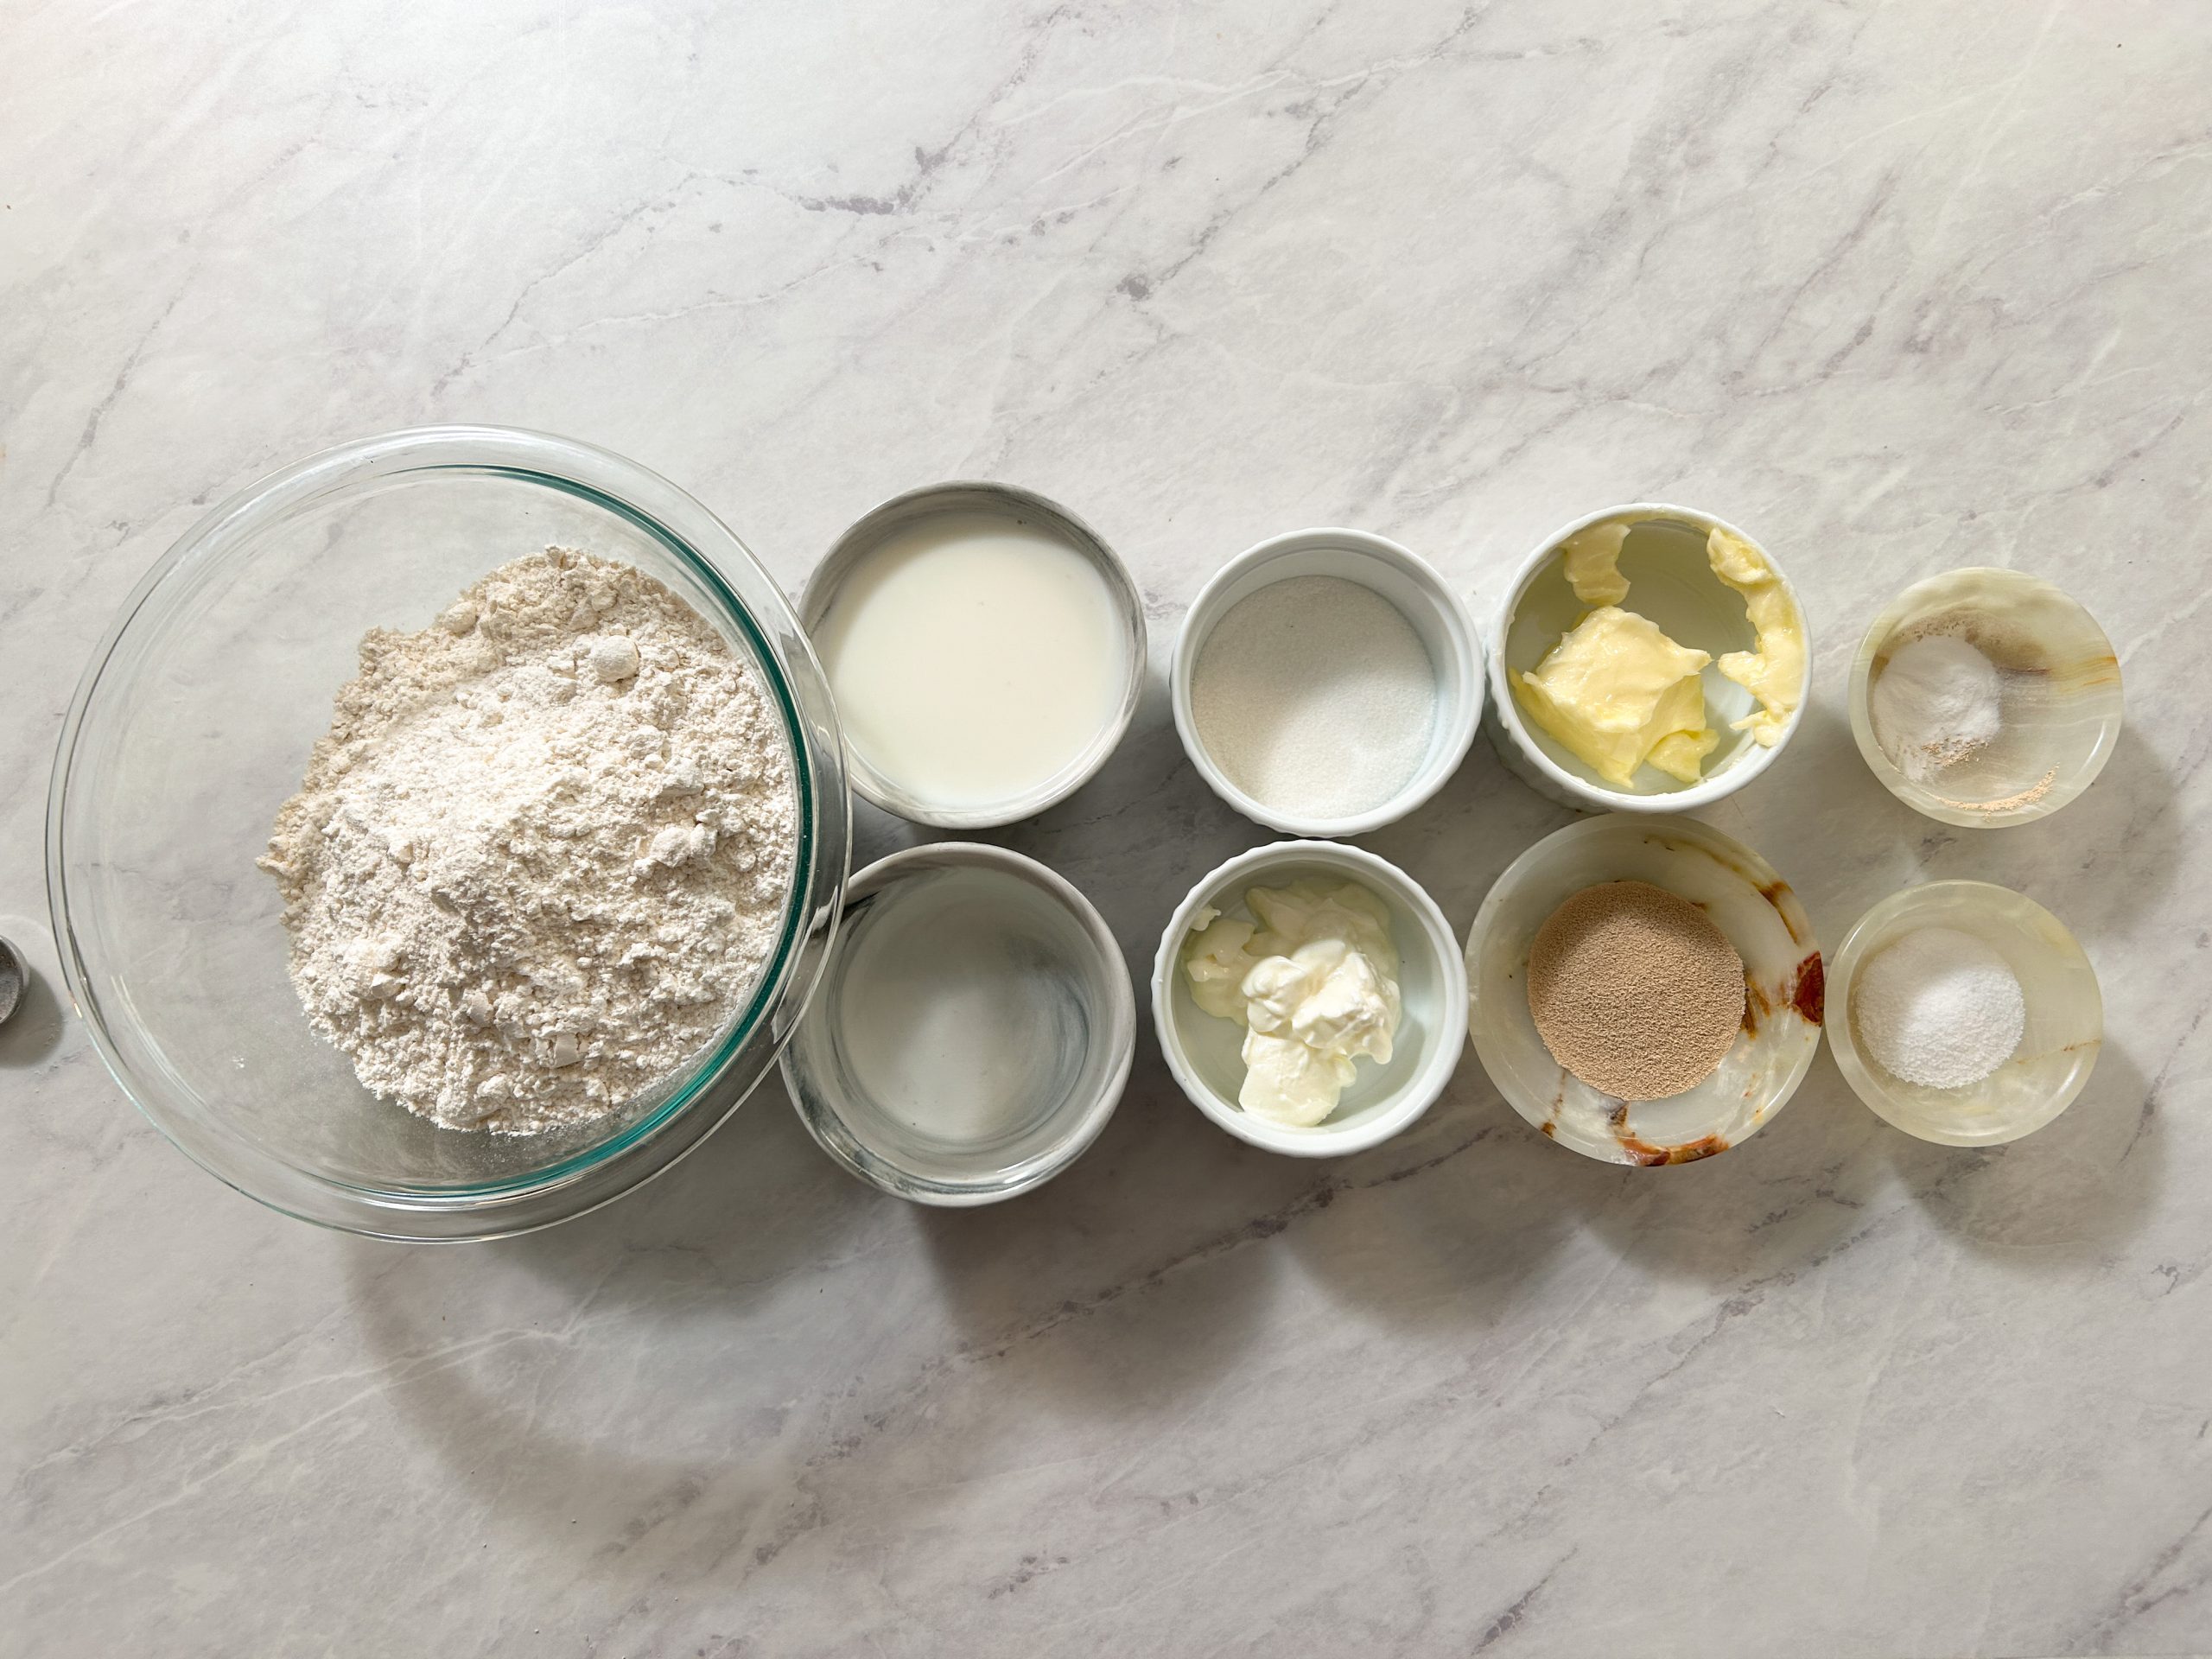 overhead picture of all the ingredients needed to make roghni naan in small bowls